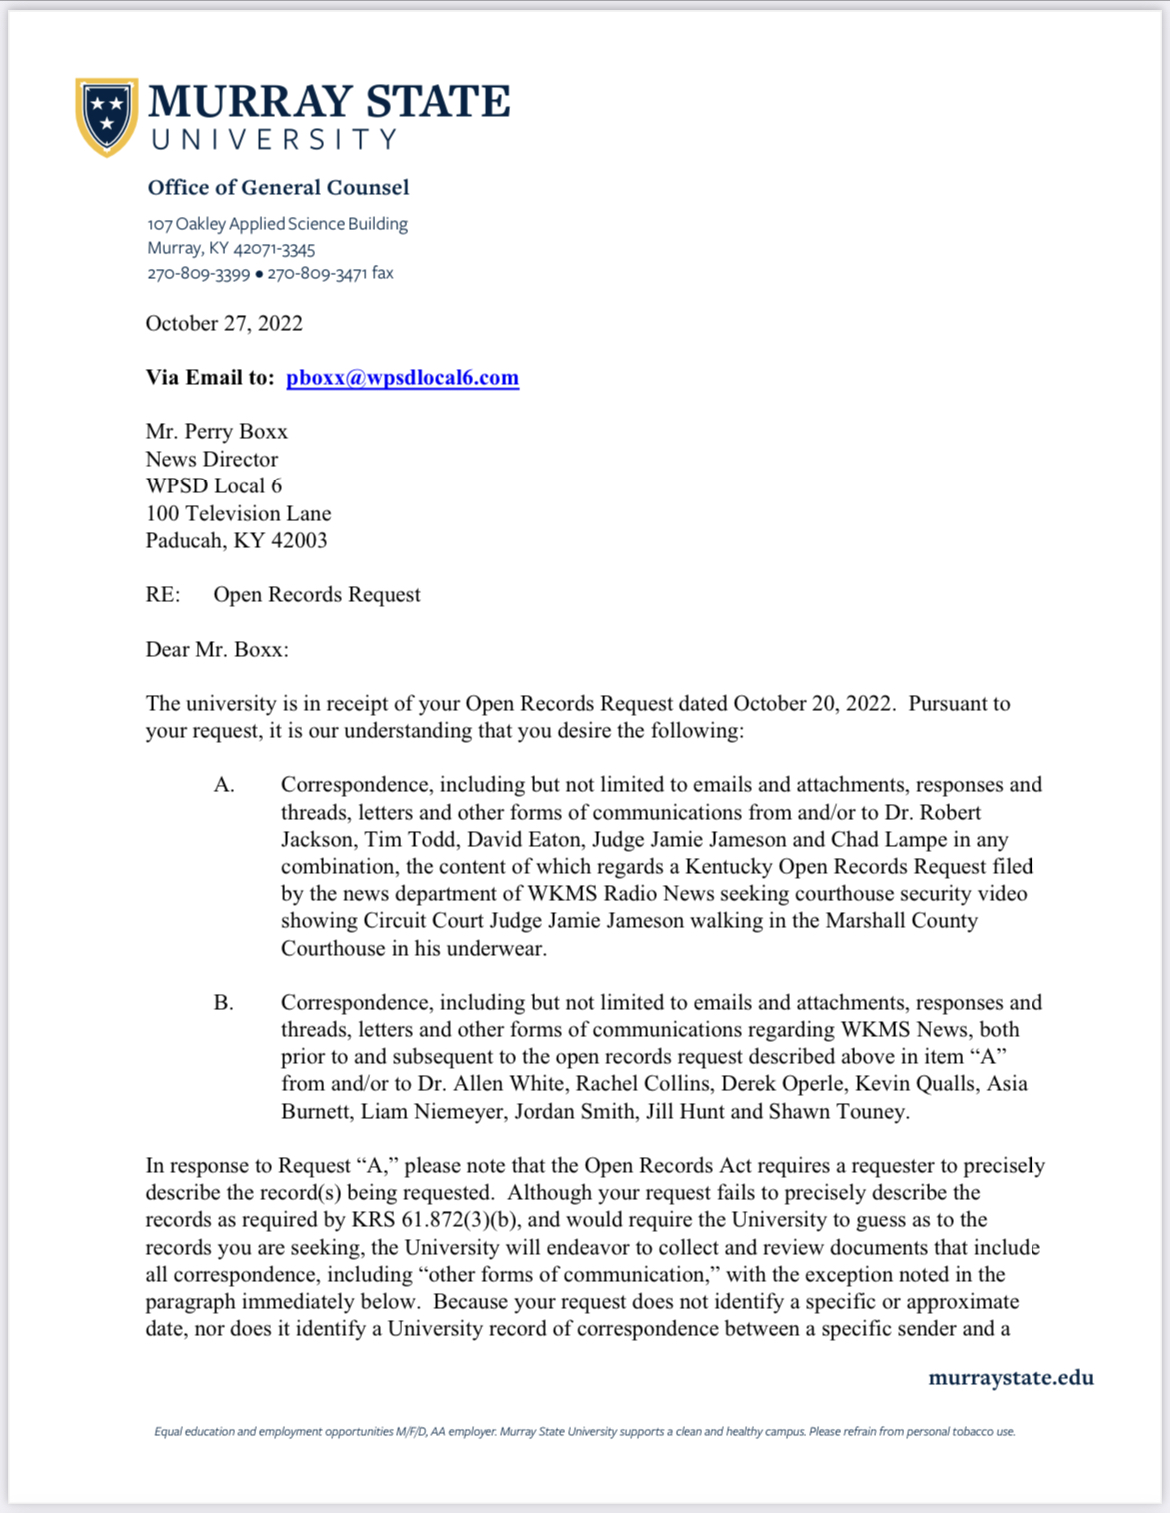 First page of Murray State’s denial of WPSD request